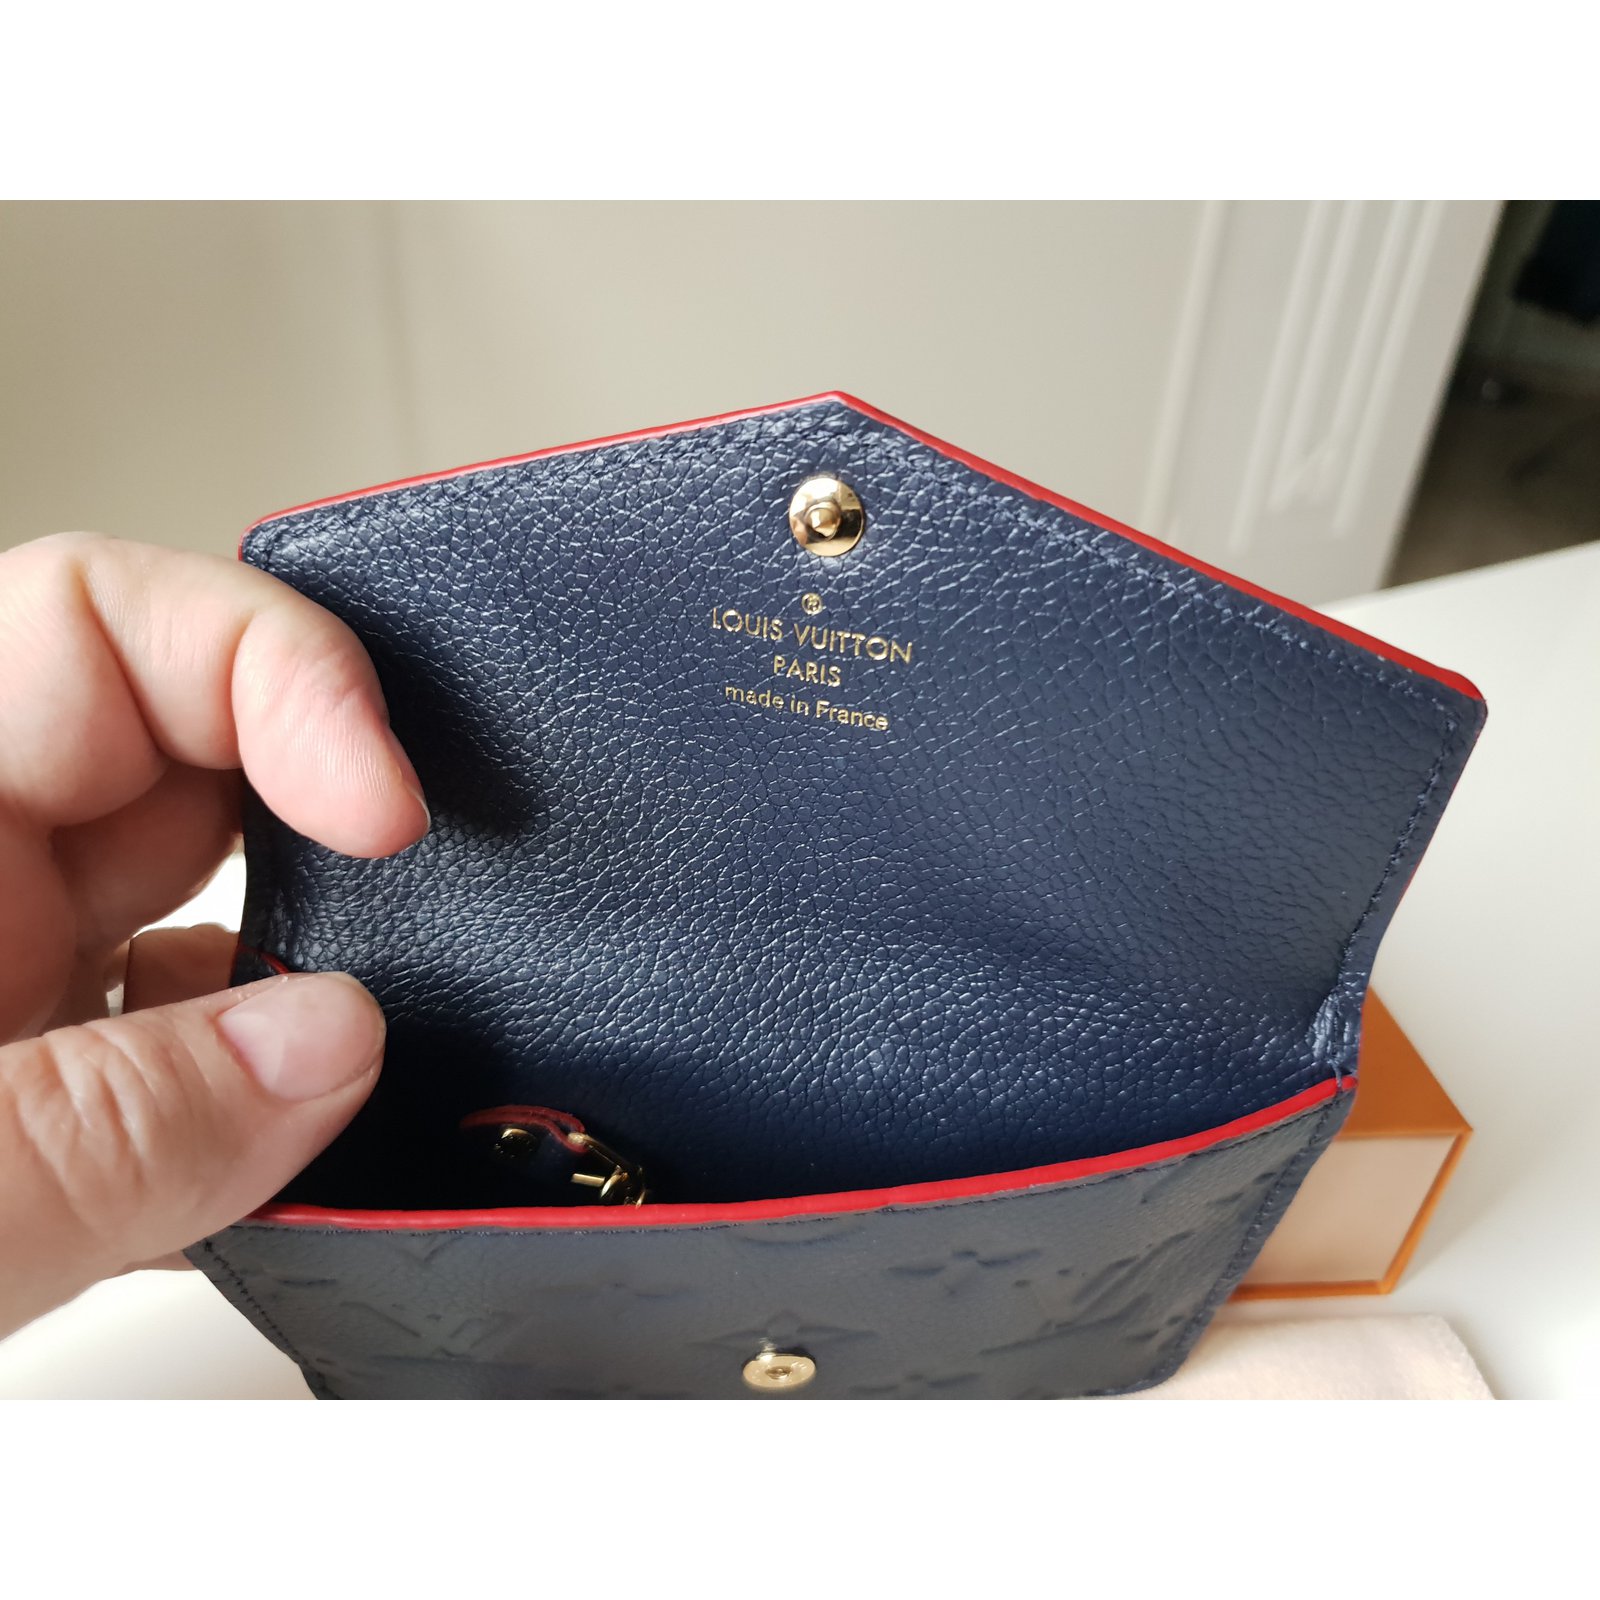 Louis Vuitton KEY POUCH IN LEATHER FOOTPRINT Red Navy blue ref